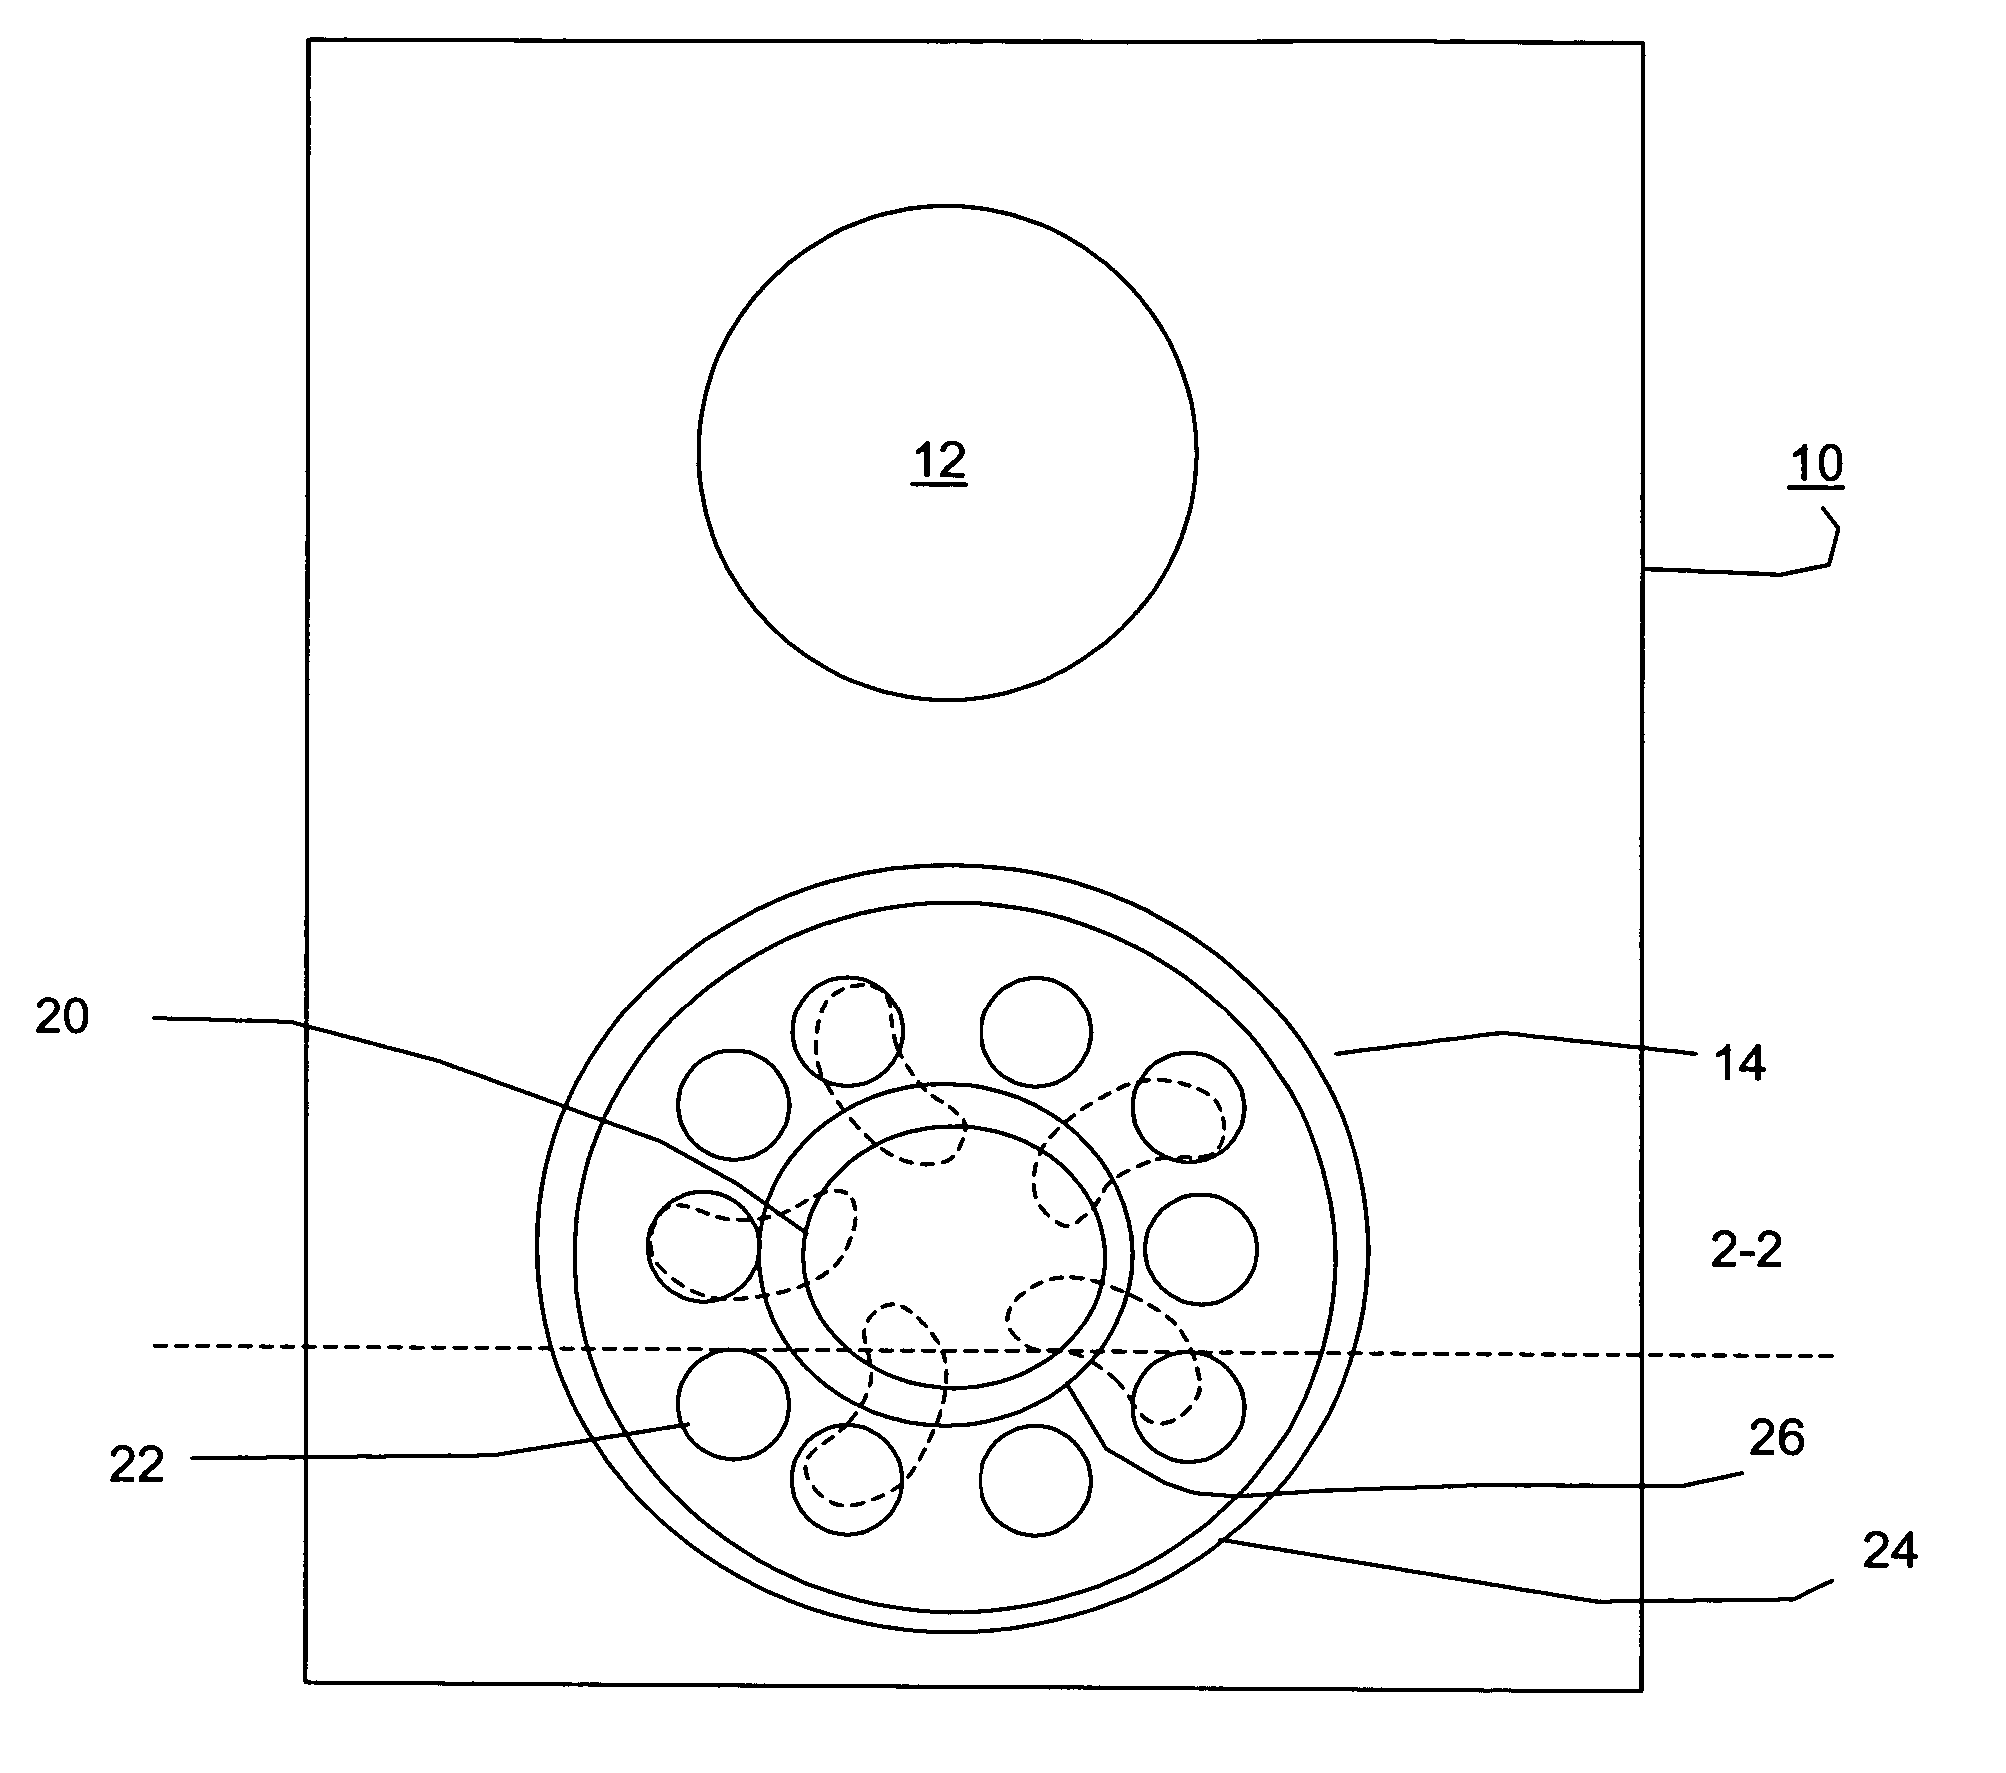 Method and apparatus for cleaning slurry depositions from a water carrier